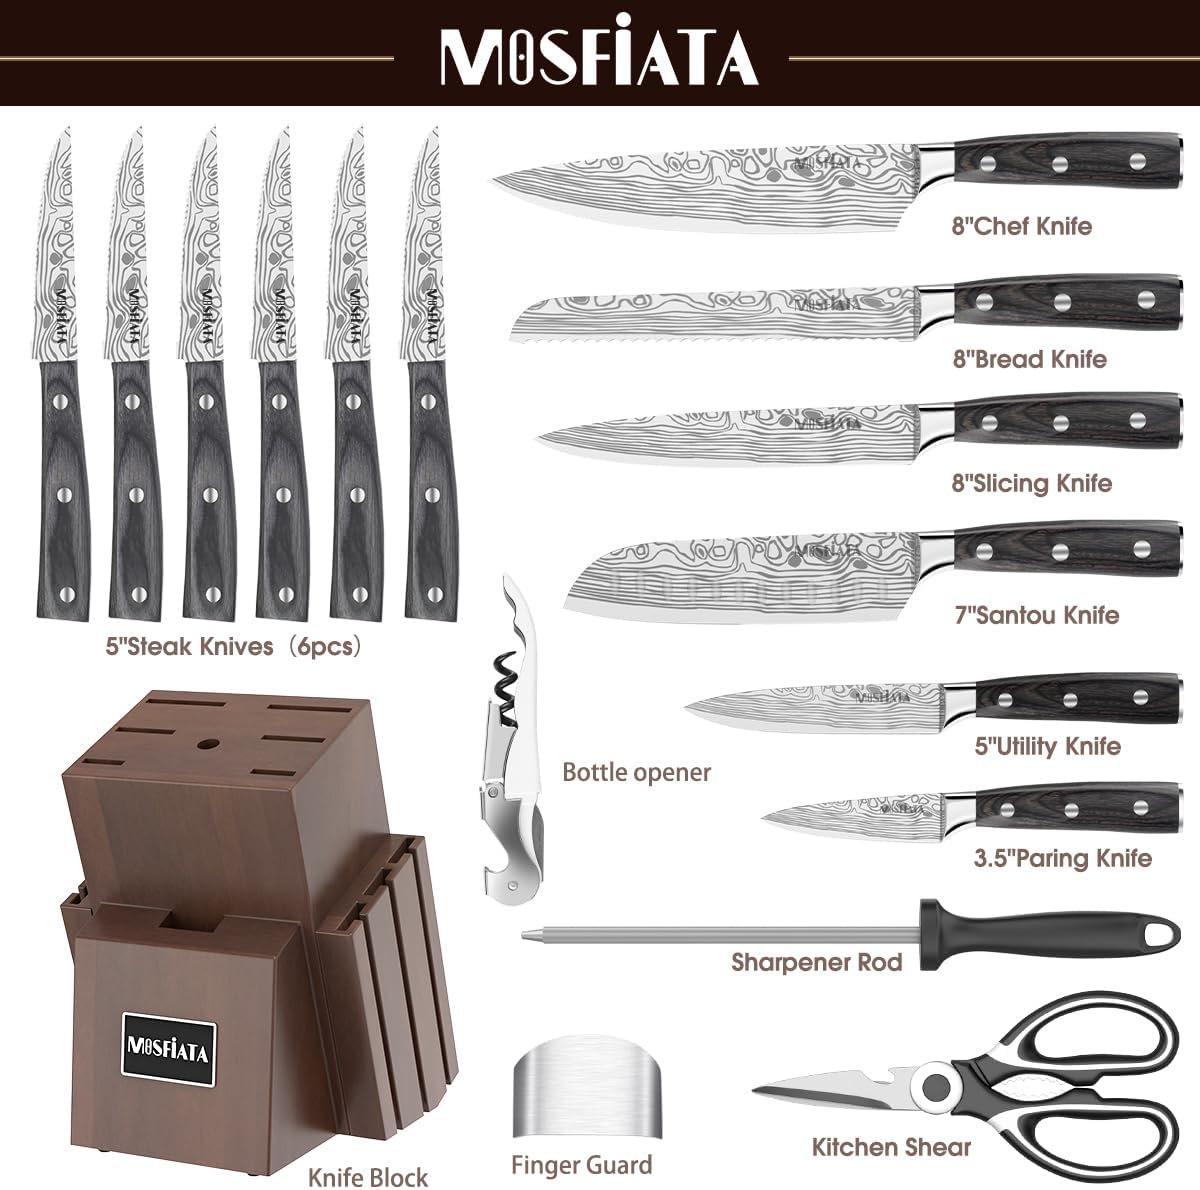 MOSFiATA 15-Piece Kitchen Knife Set with Block&Sharpening Rod, Ergonomic Handle for Chef Knife Set and Serrated Steak Knives Knife Sharpener and Kitchen Shears, Bottle Opener